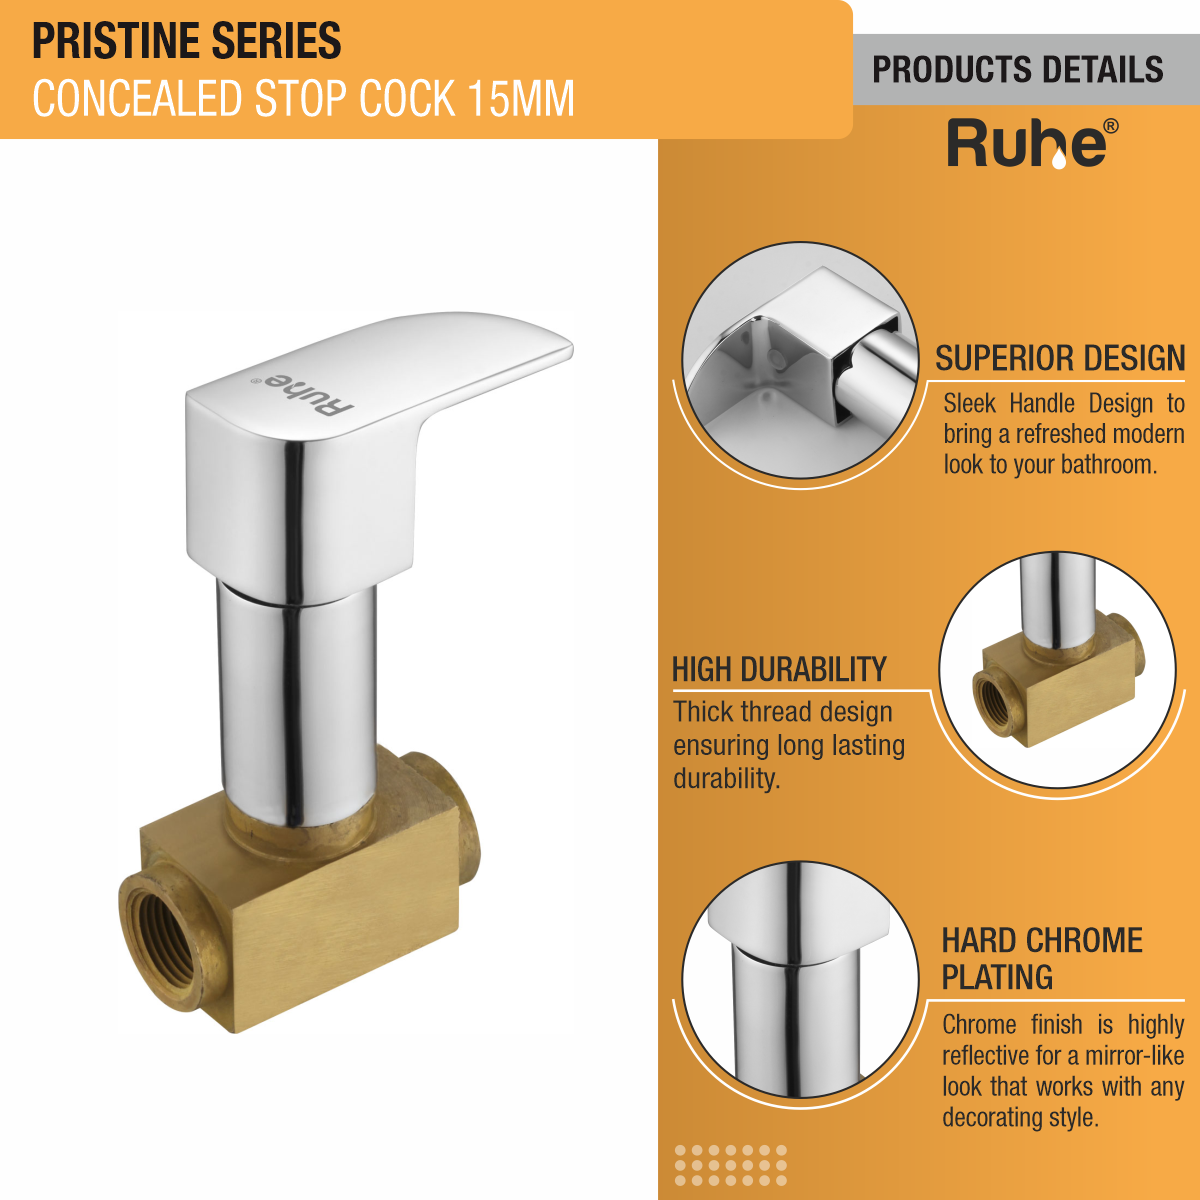 Pristine Concealed Stop Valve Brass Faucet (15mm) product details